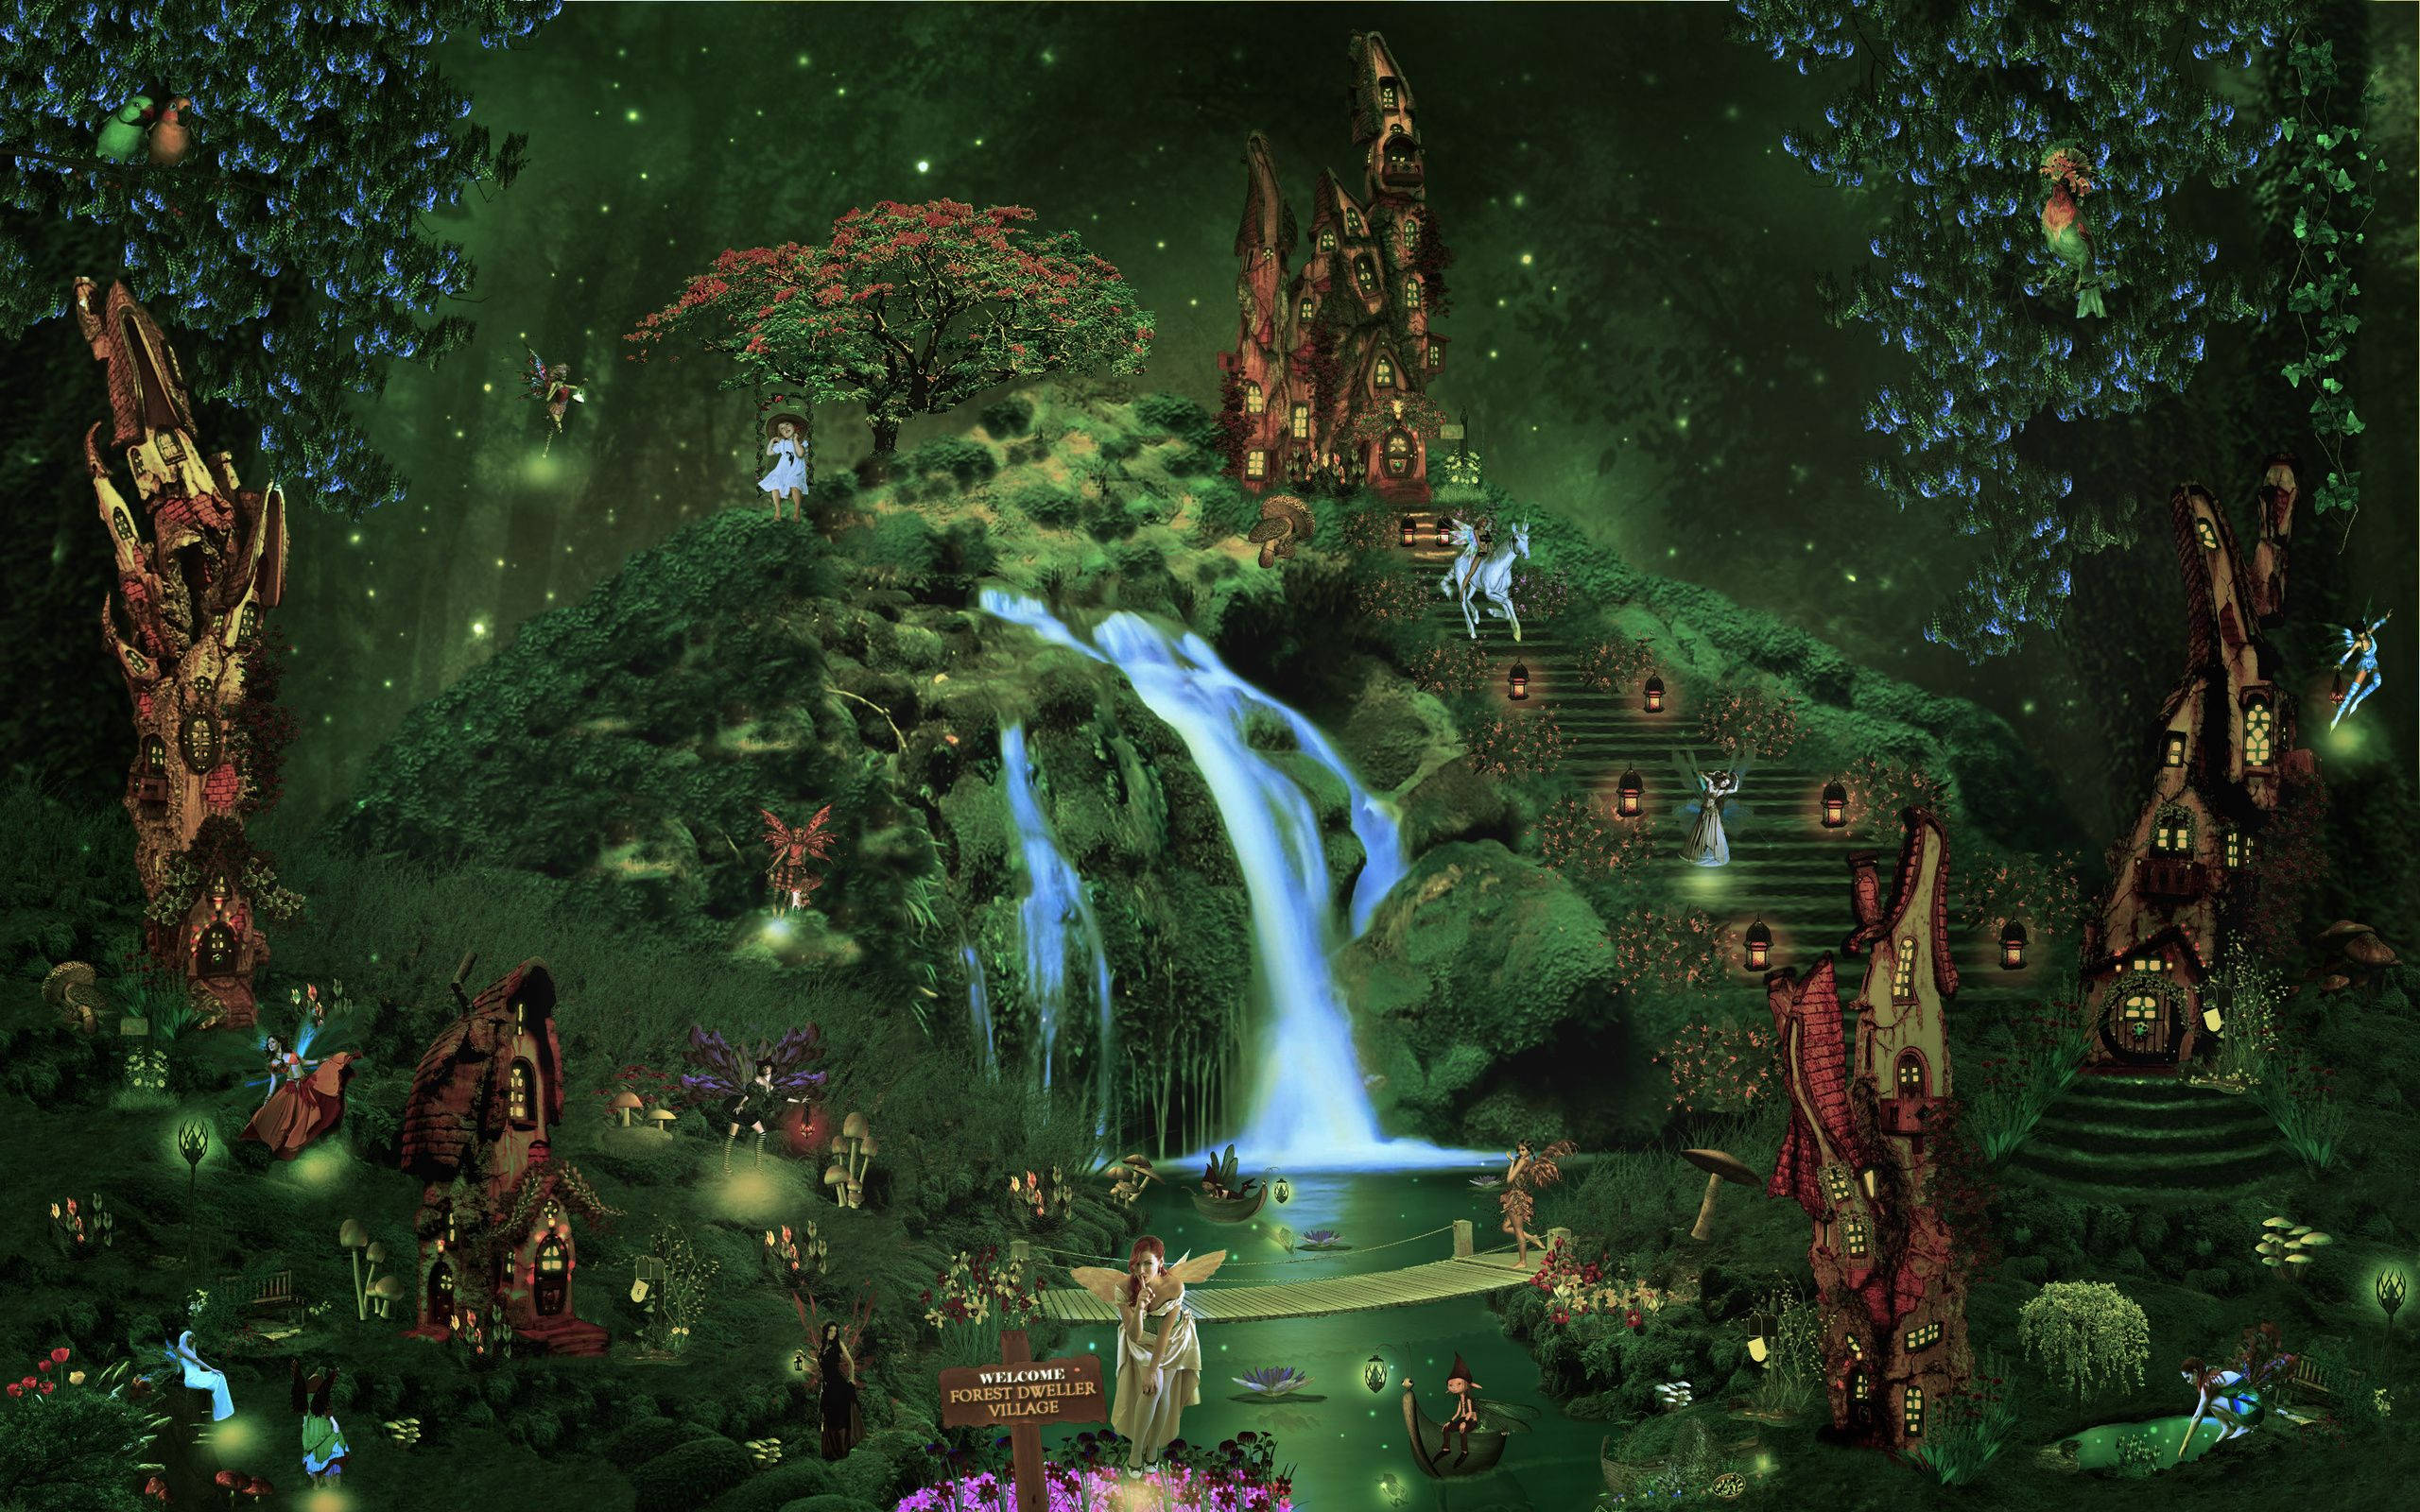 Enchanted Forest Fairy Village Wallpaper